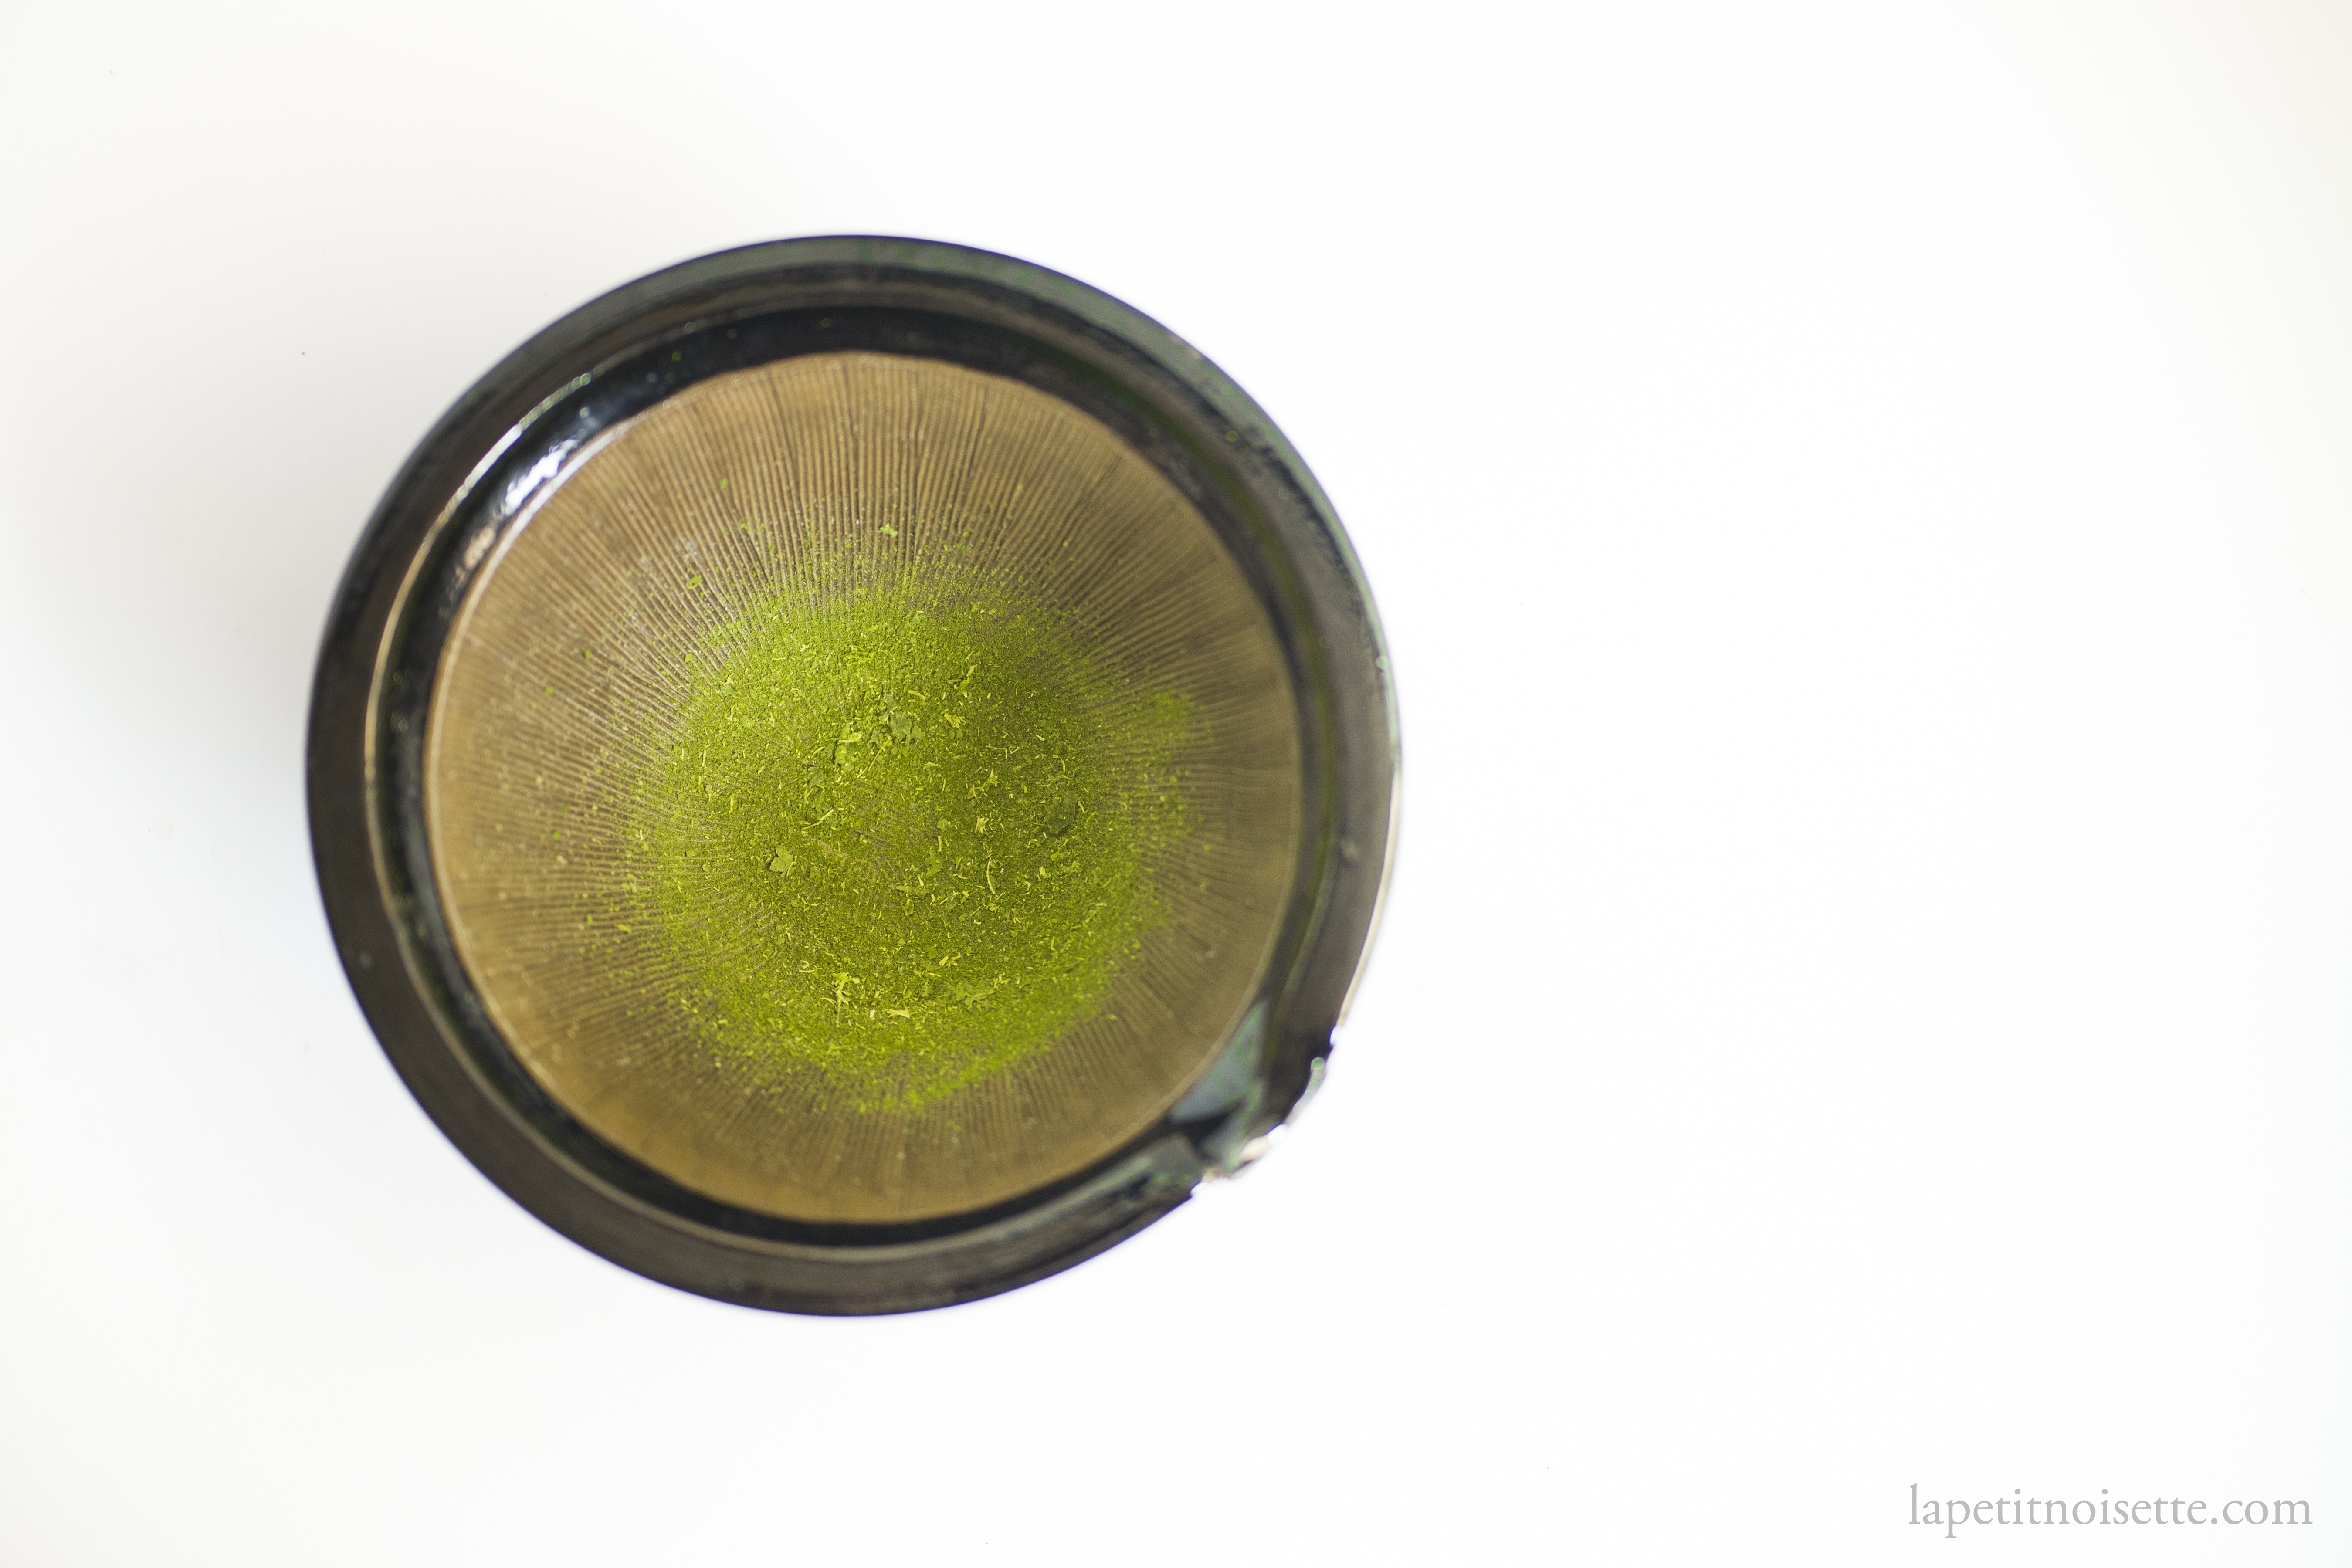 Mulberry matcha made in a mortar.